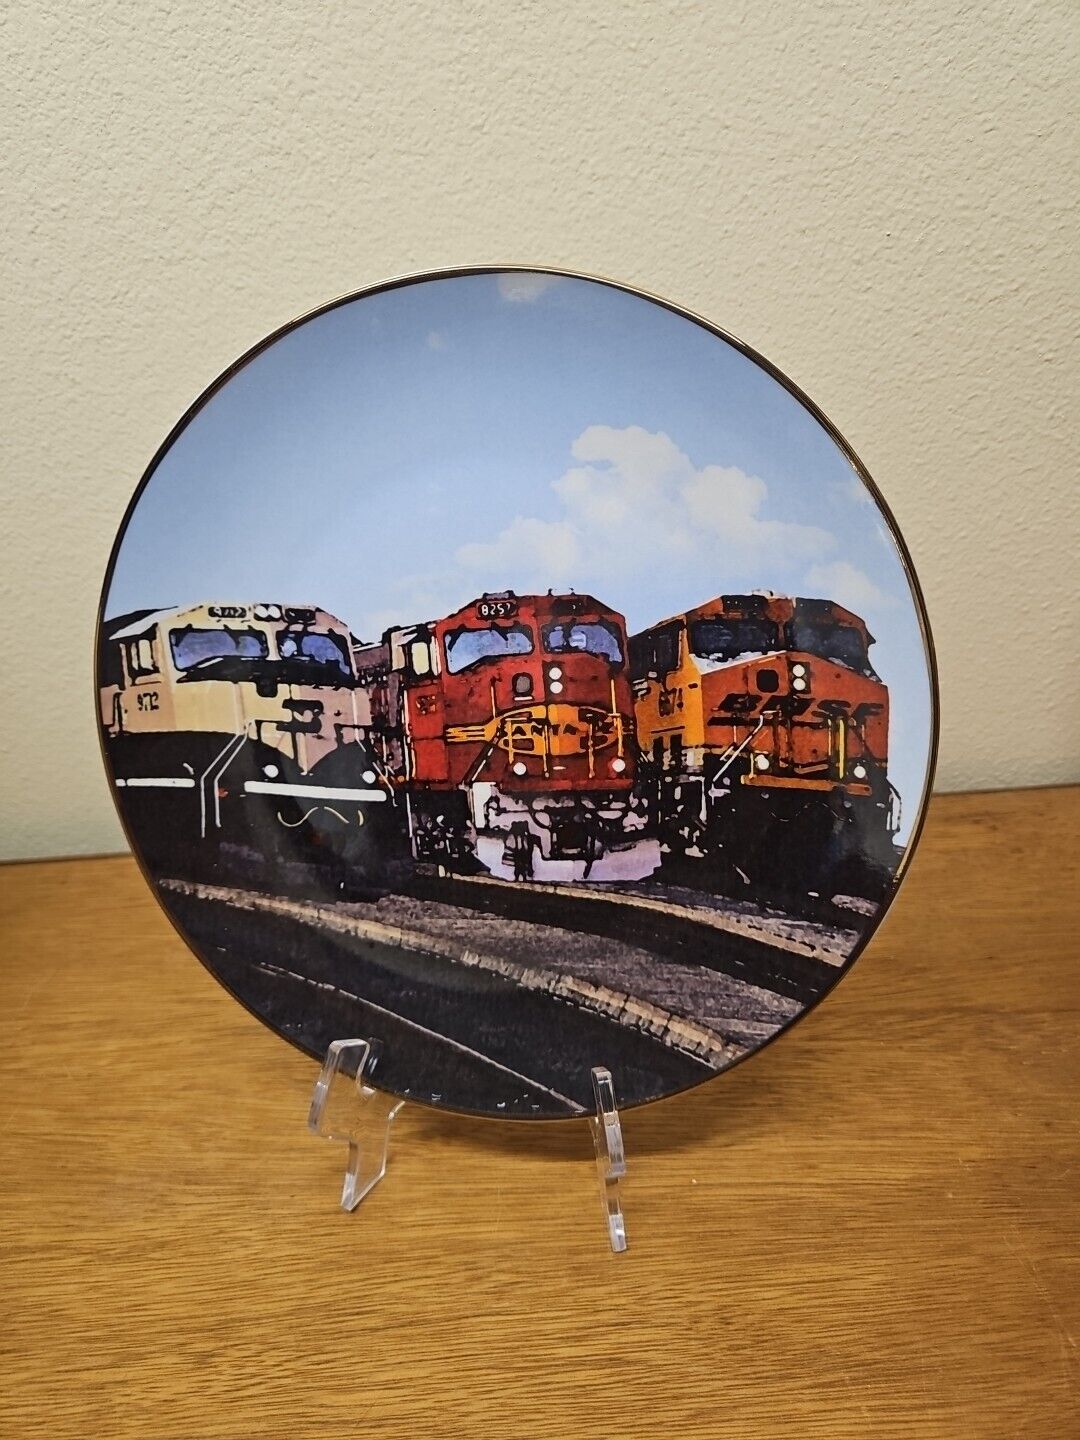 BNSF Railway Collector Plate 25th Anniversary & 2019 Safety Award 